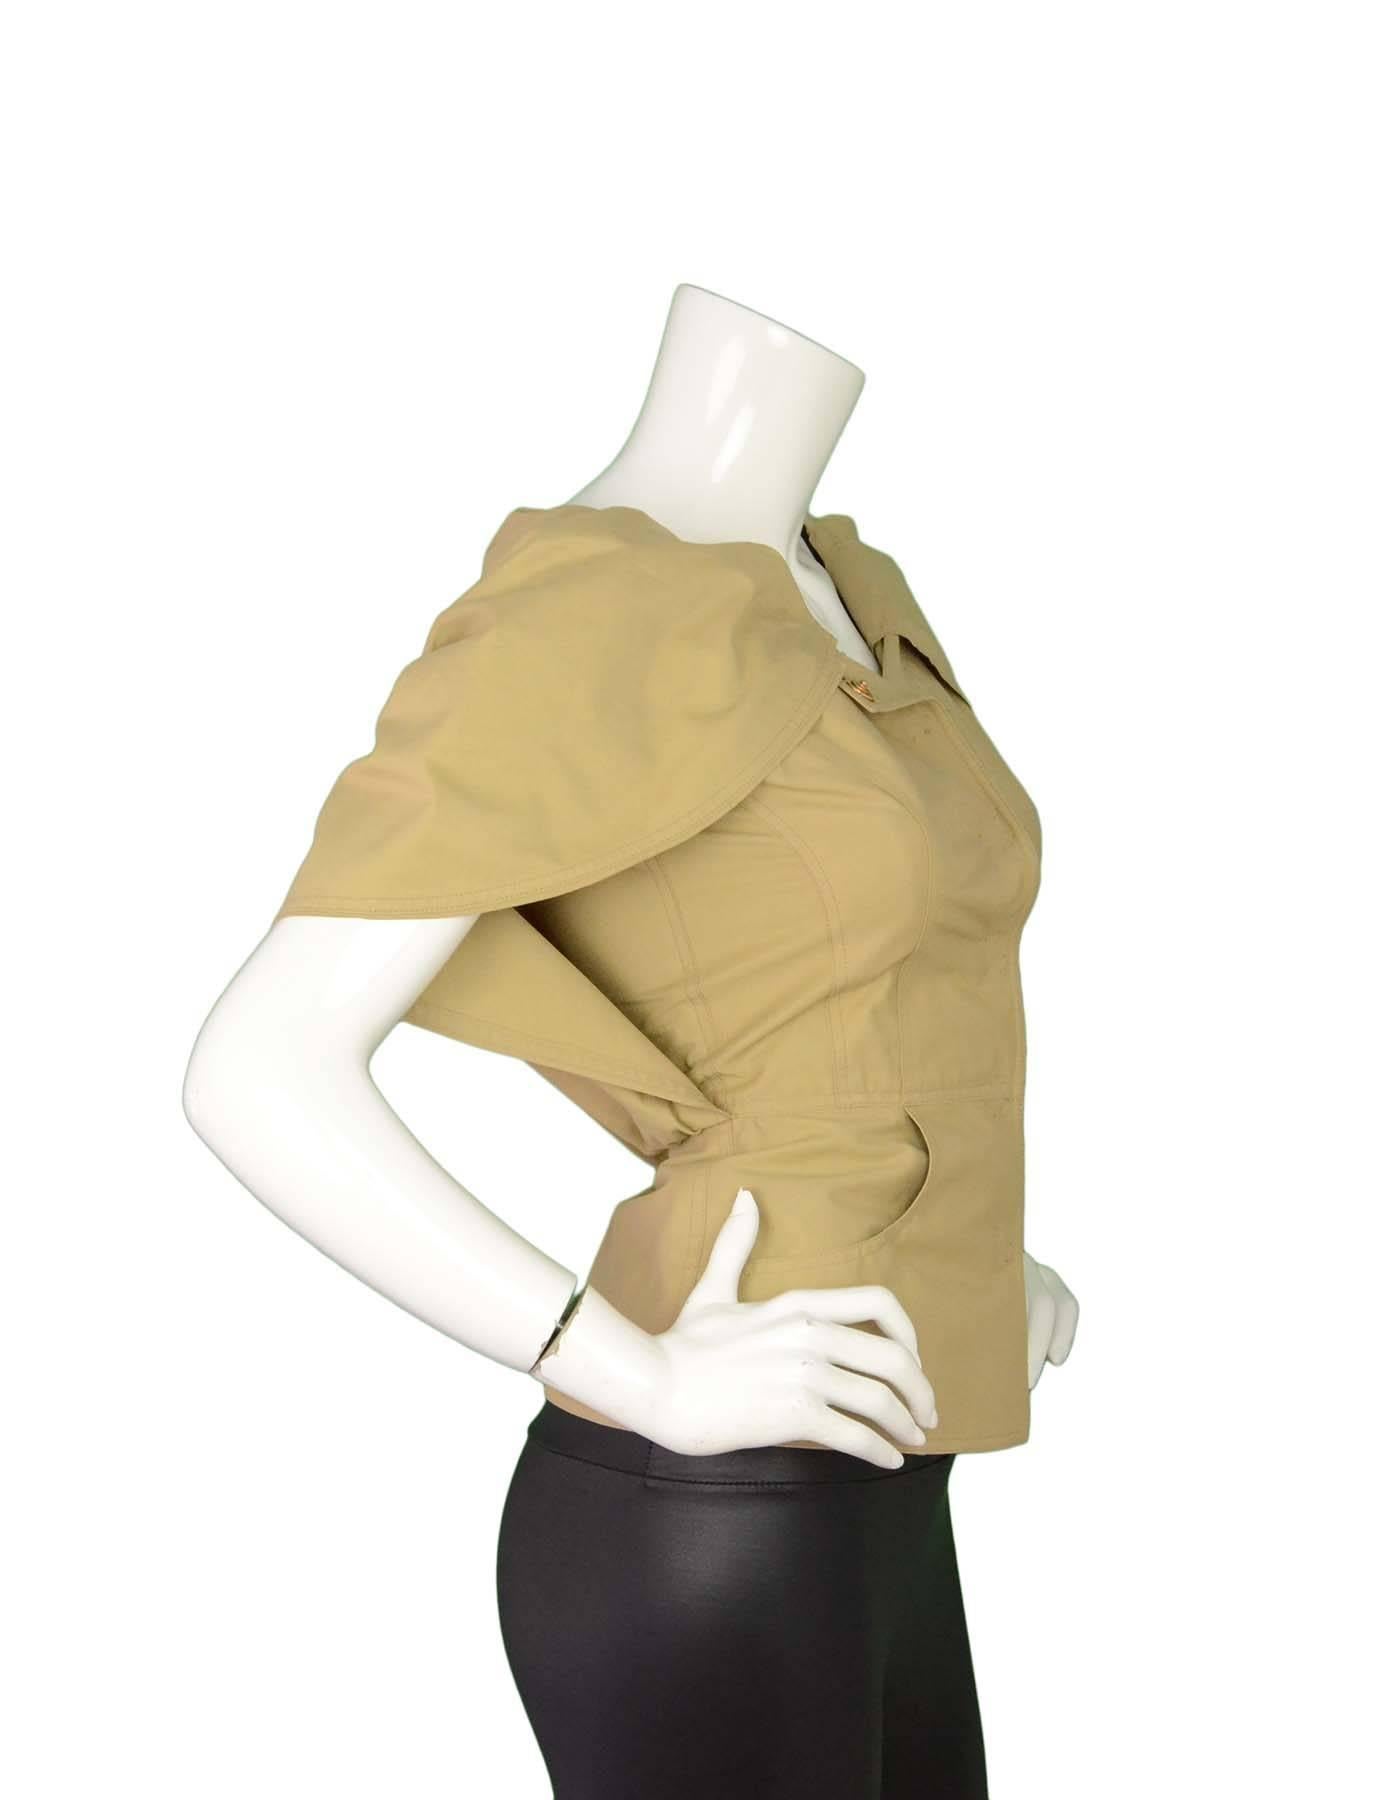 Fendi Beige Cape Jacket Sz 38 NWT

Made In: Italy
Color: Beige
Composition: 63% Cotton, 37% Nylon
Lining: None
Closure/Opening: Snap button closure at front
Exterior Pockets: Two side pockets
Interior Pockets: None
Retail Price: $1,990 +